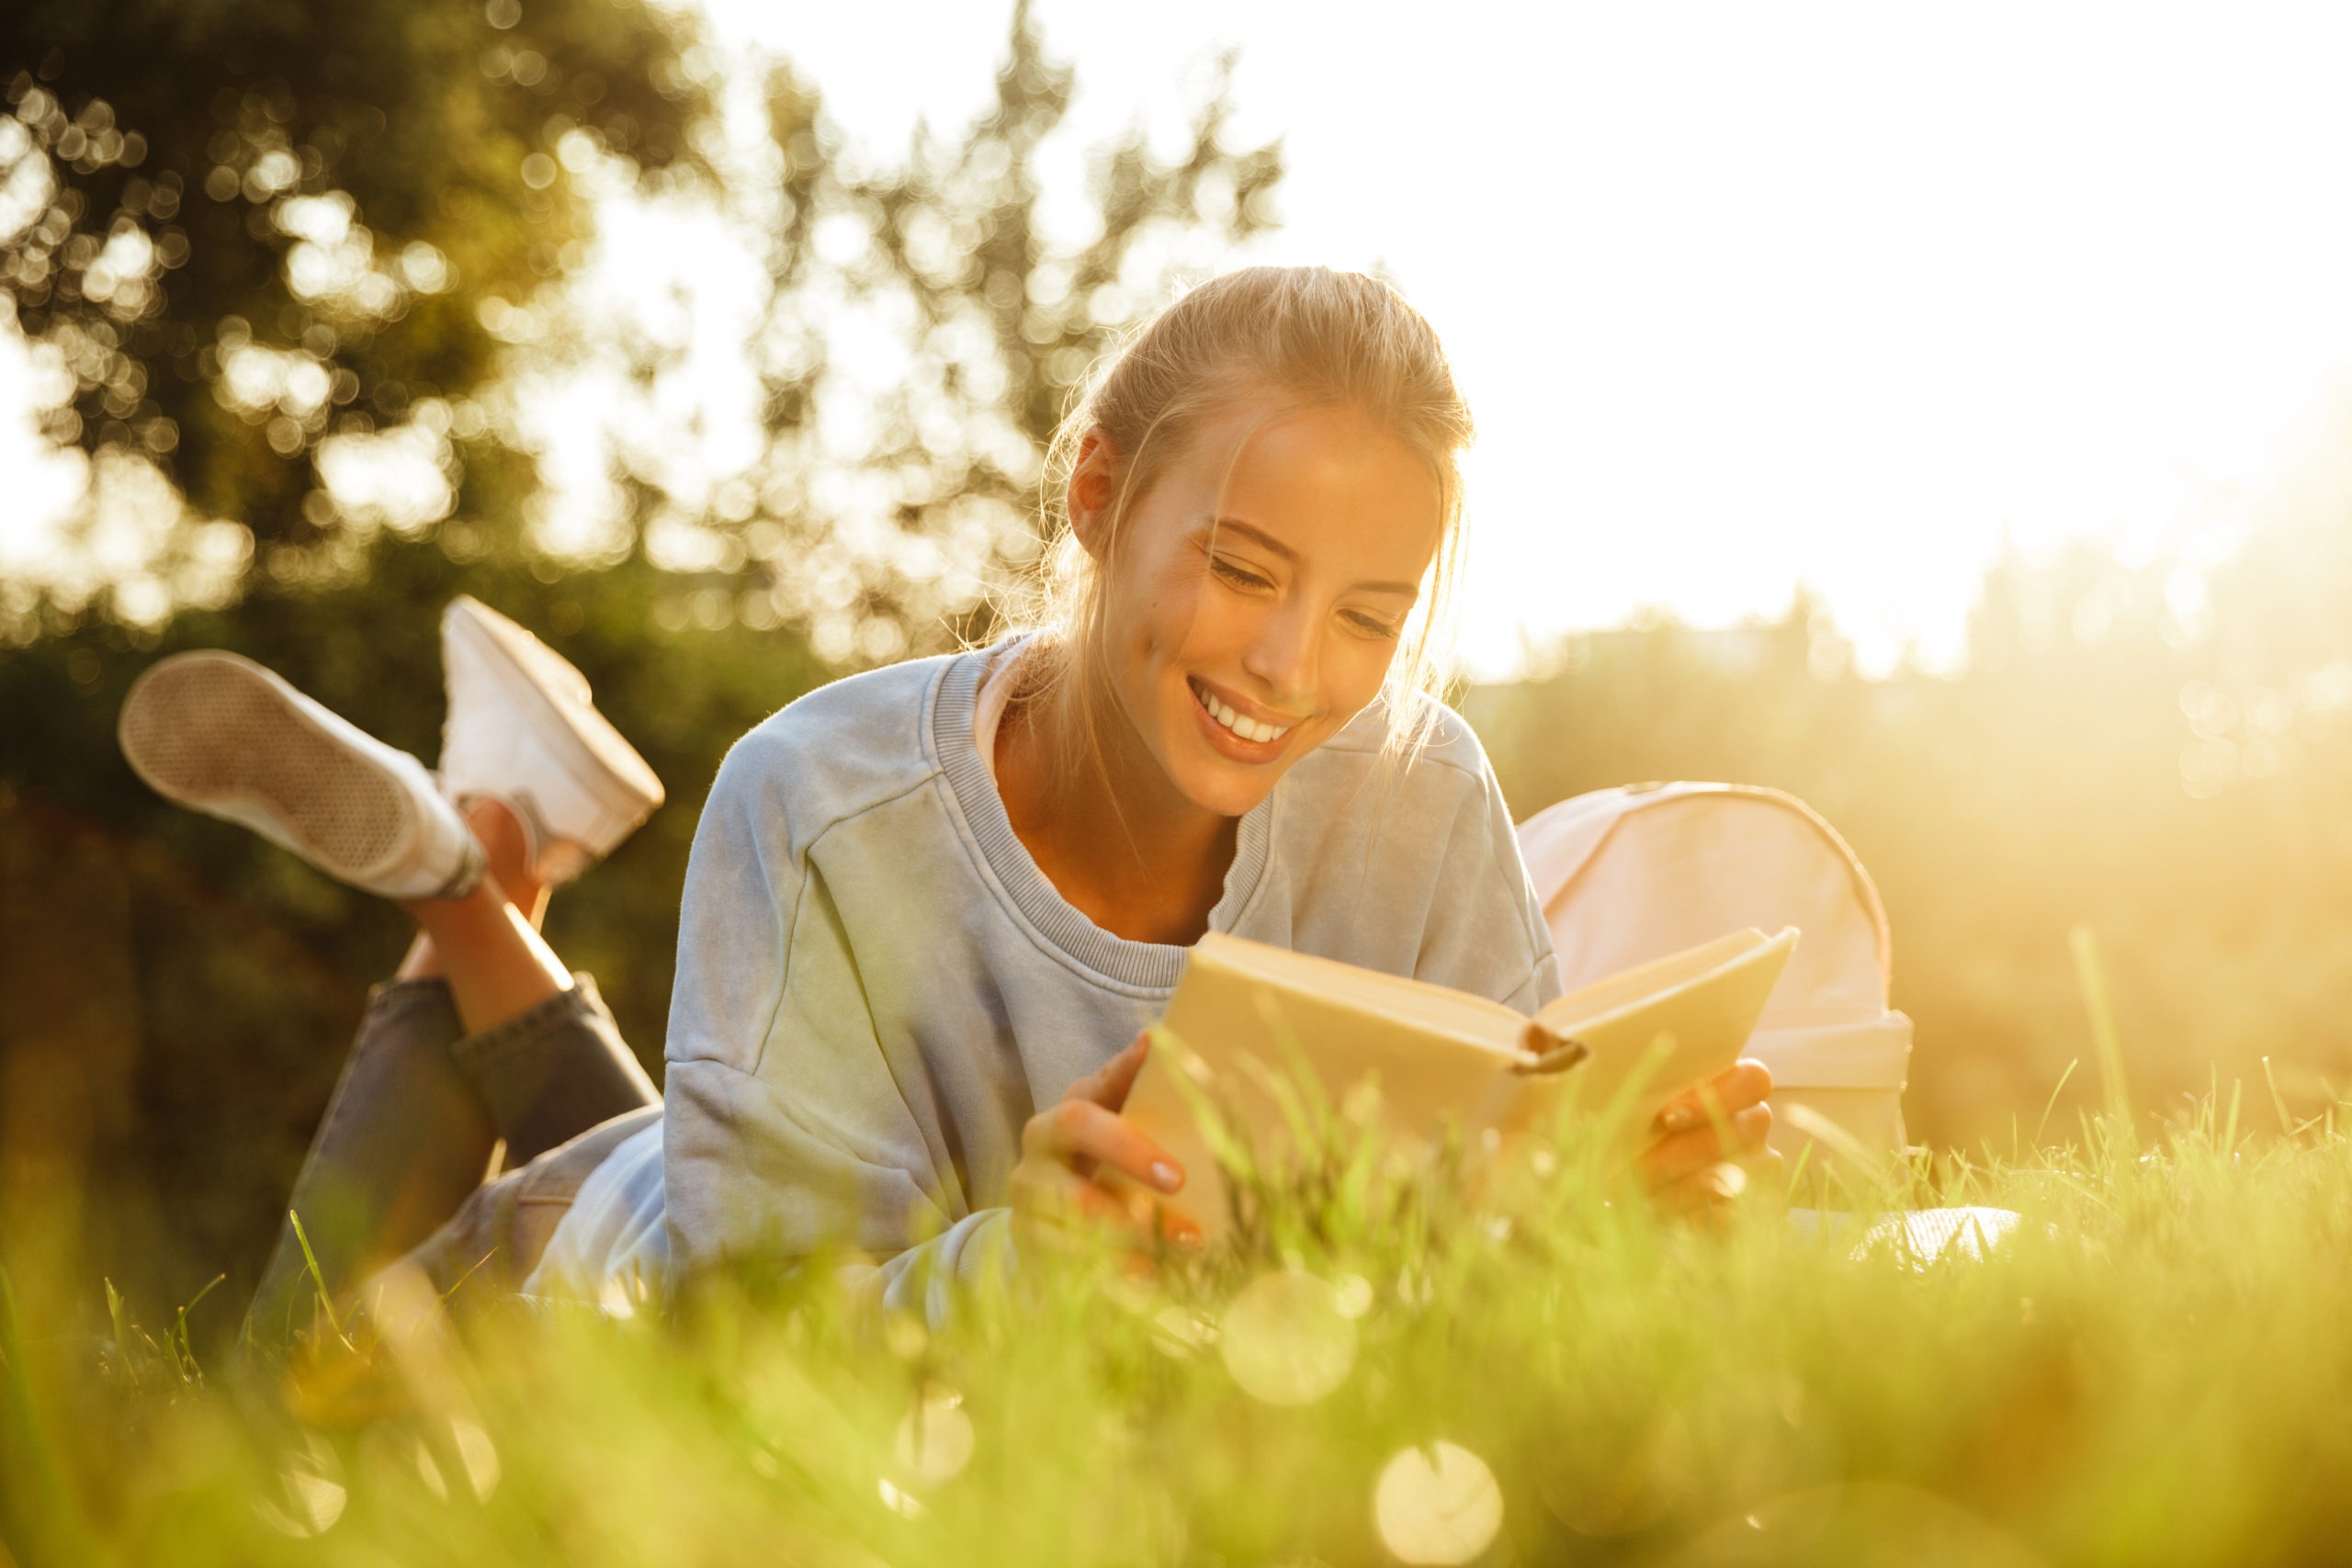 A smiling young girl reading a book on the grass outdoors.